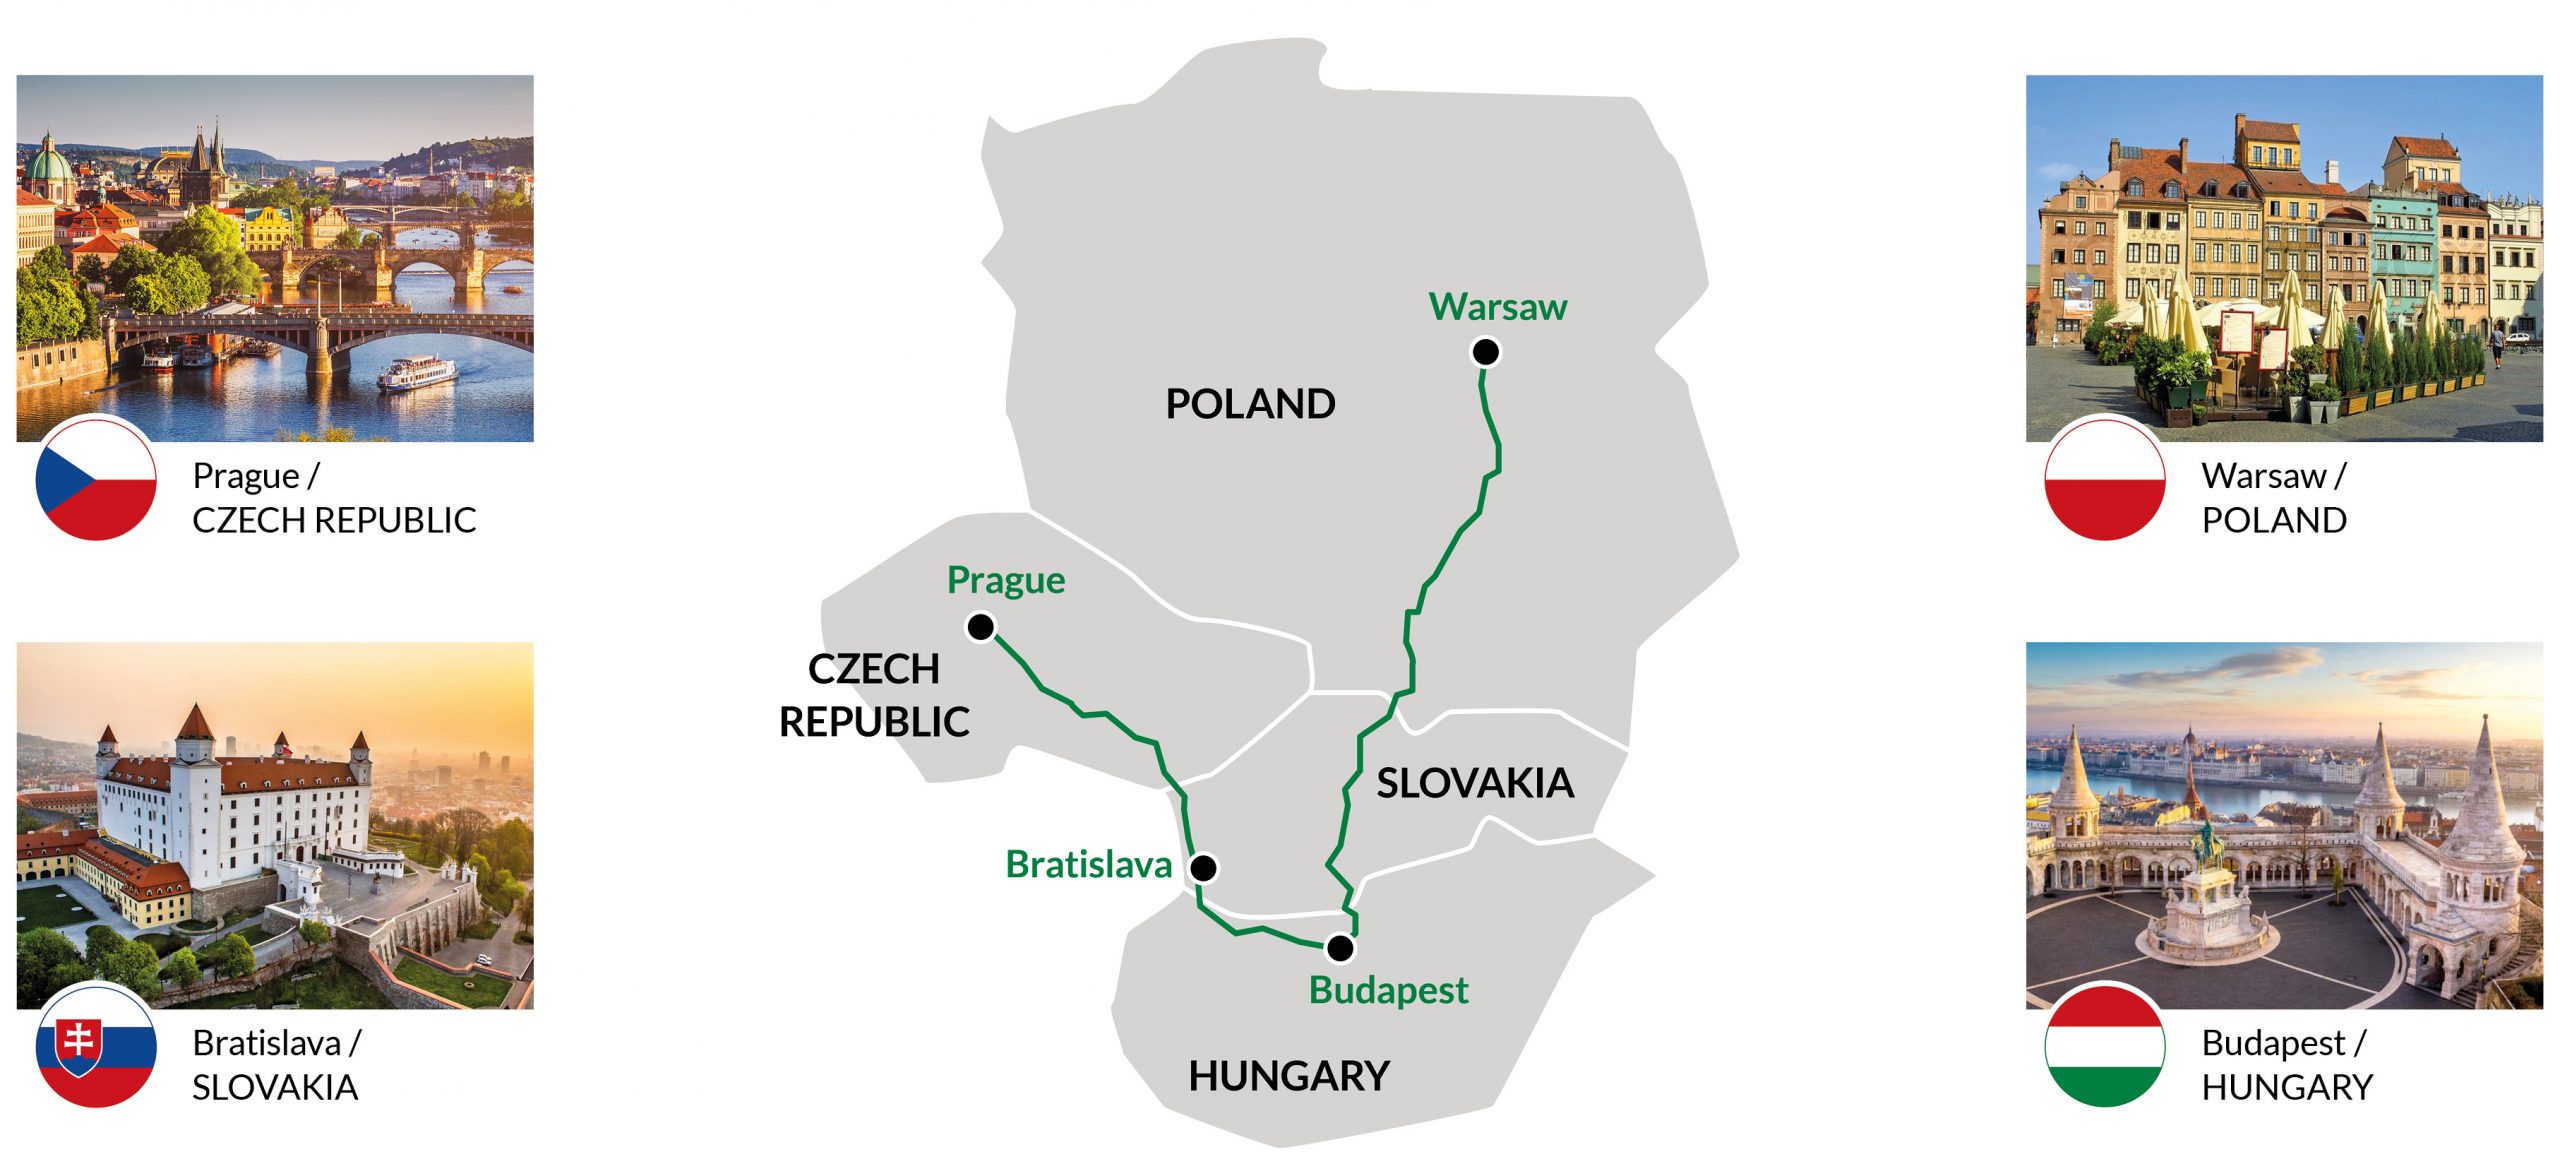 Roadshow_Map_routing_Eastern_Europe